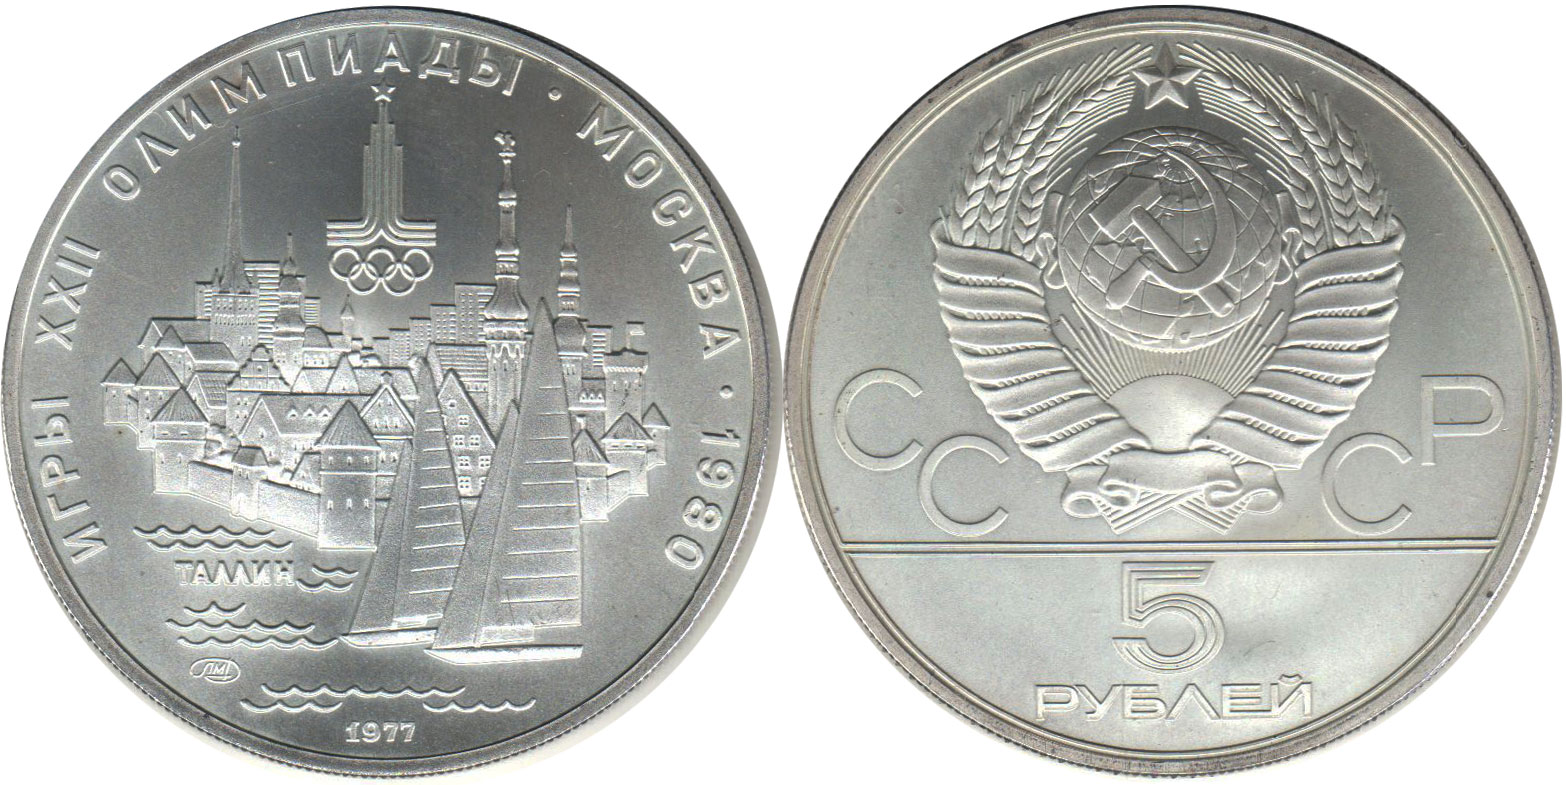 USSR Russia Soviet Friendship whith Bulgaria RUSSIA 1 rouble 1981 coin 